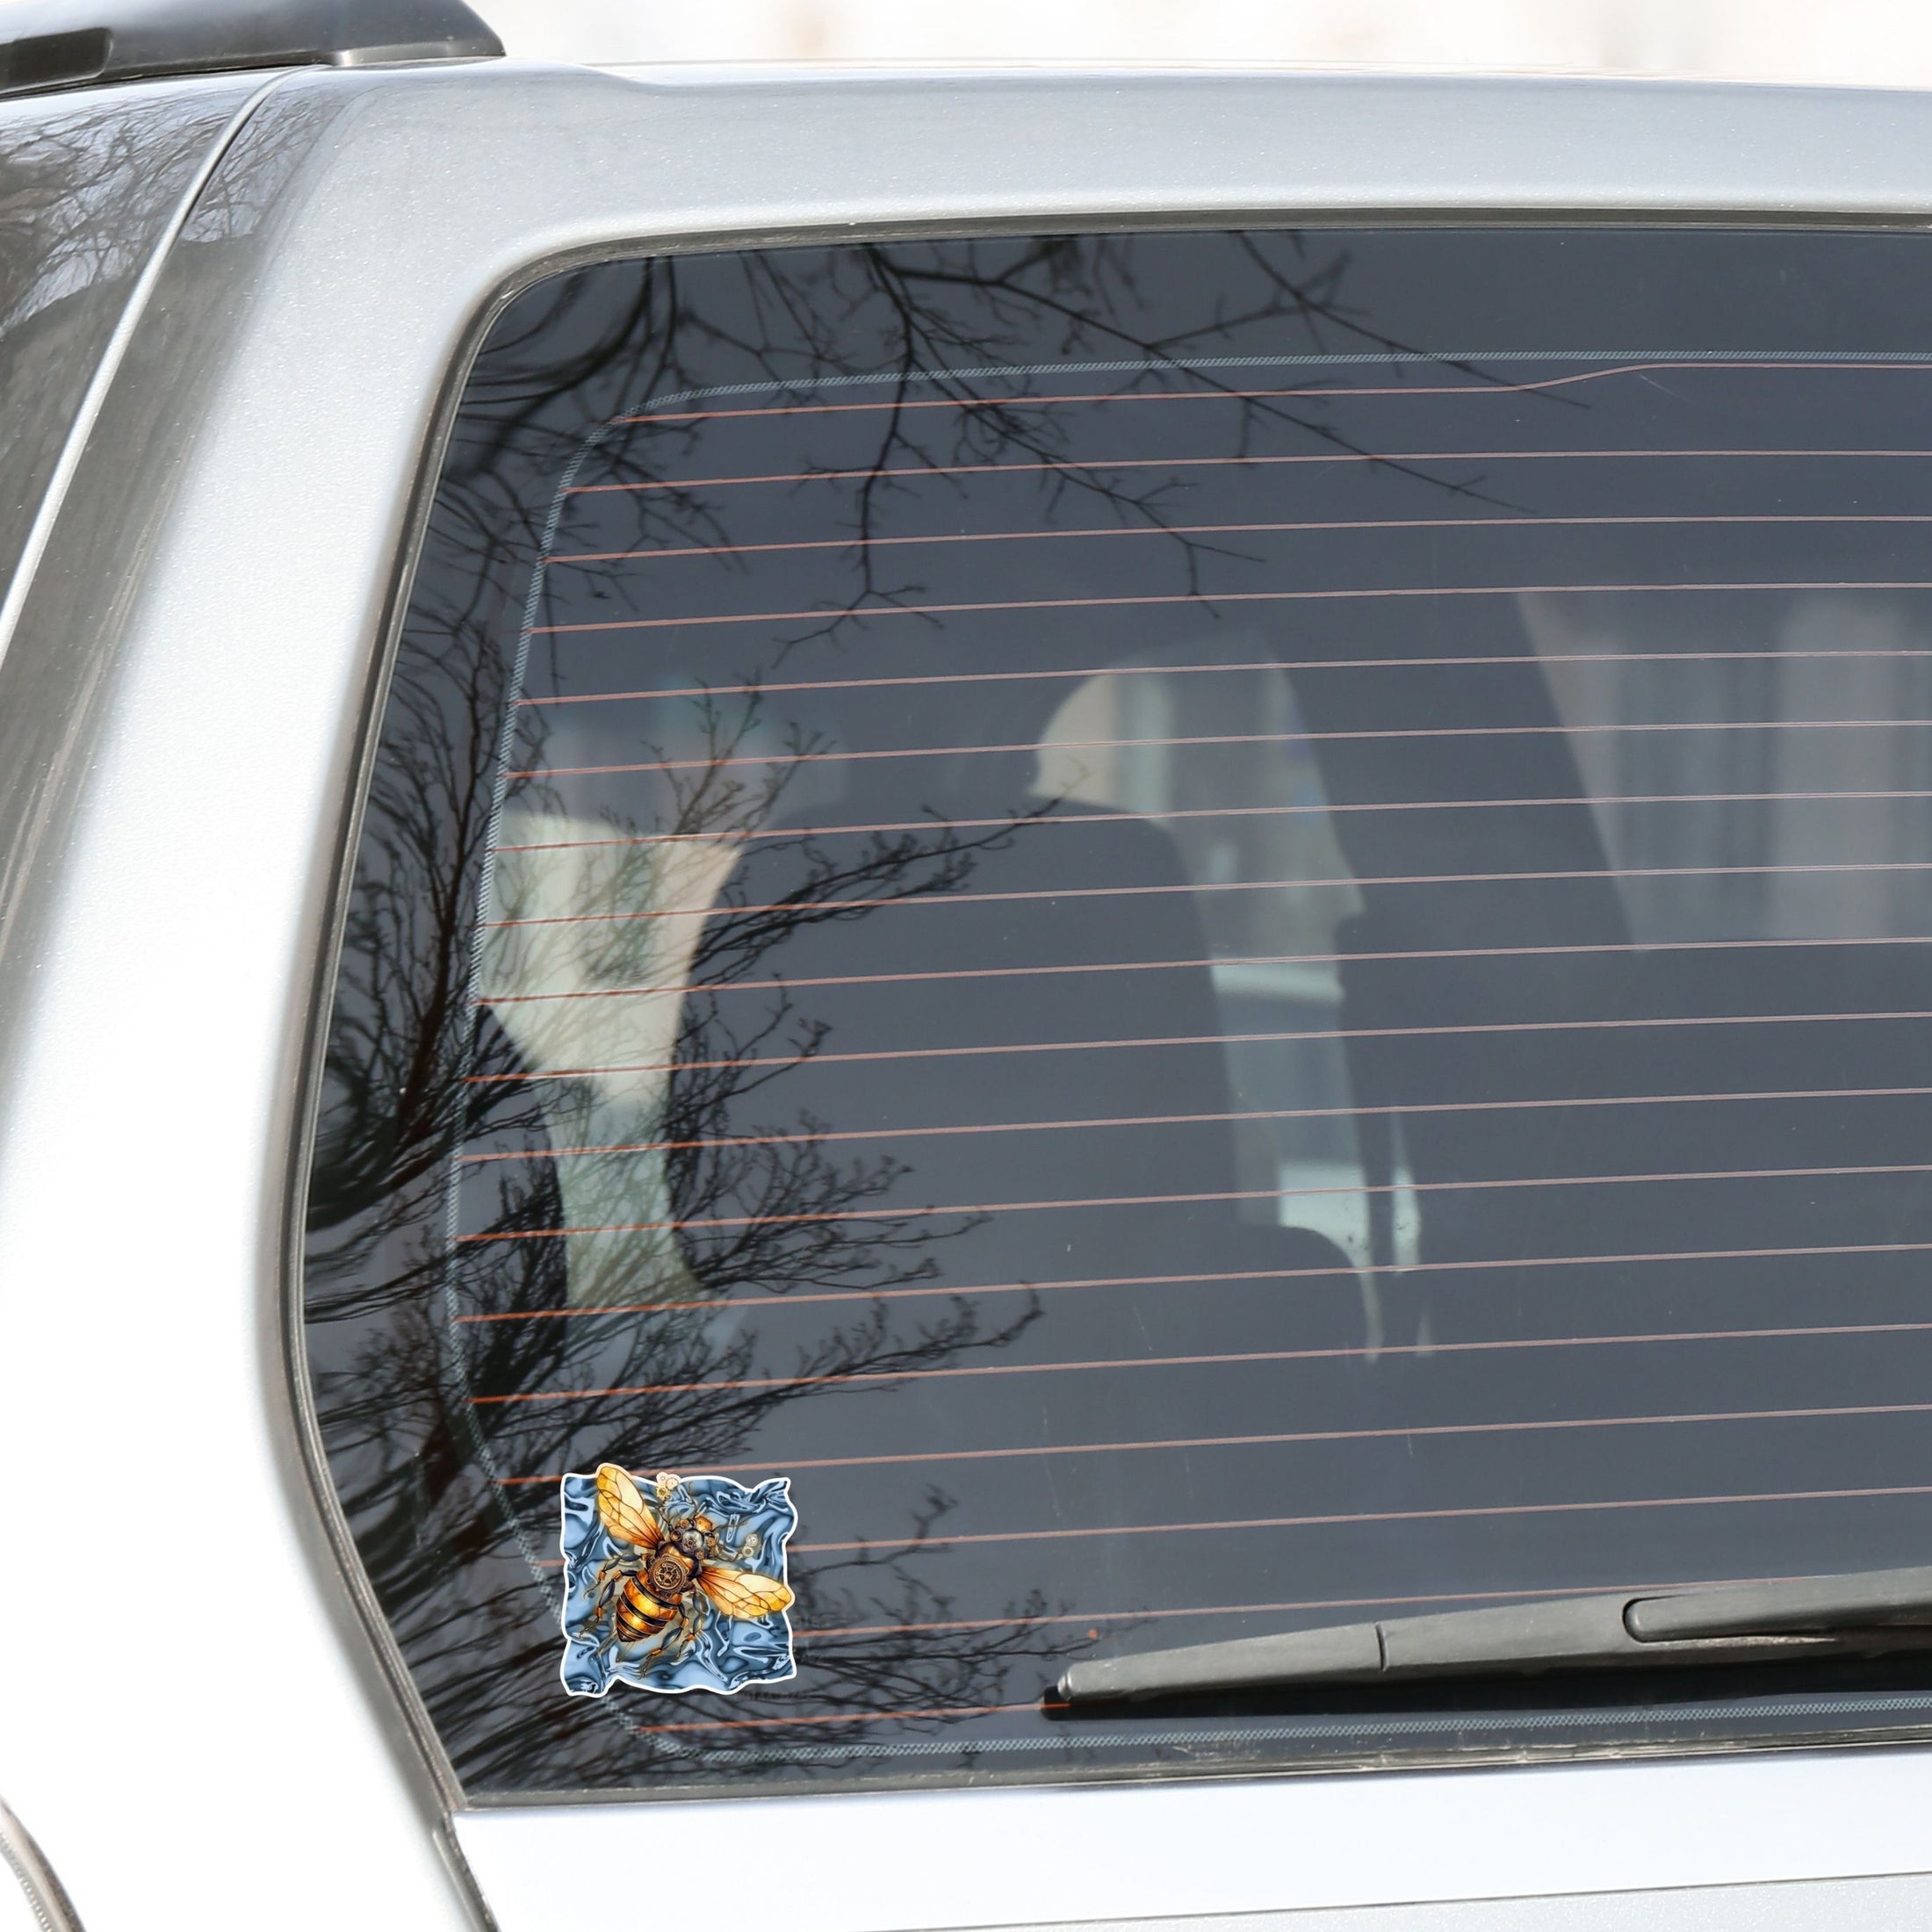 This image shows the steampunk bee sticker on the back window of a car.